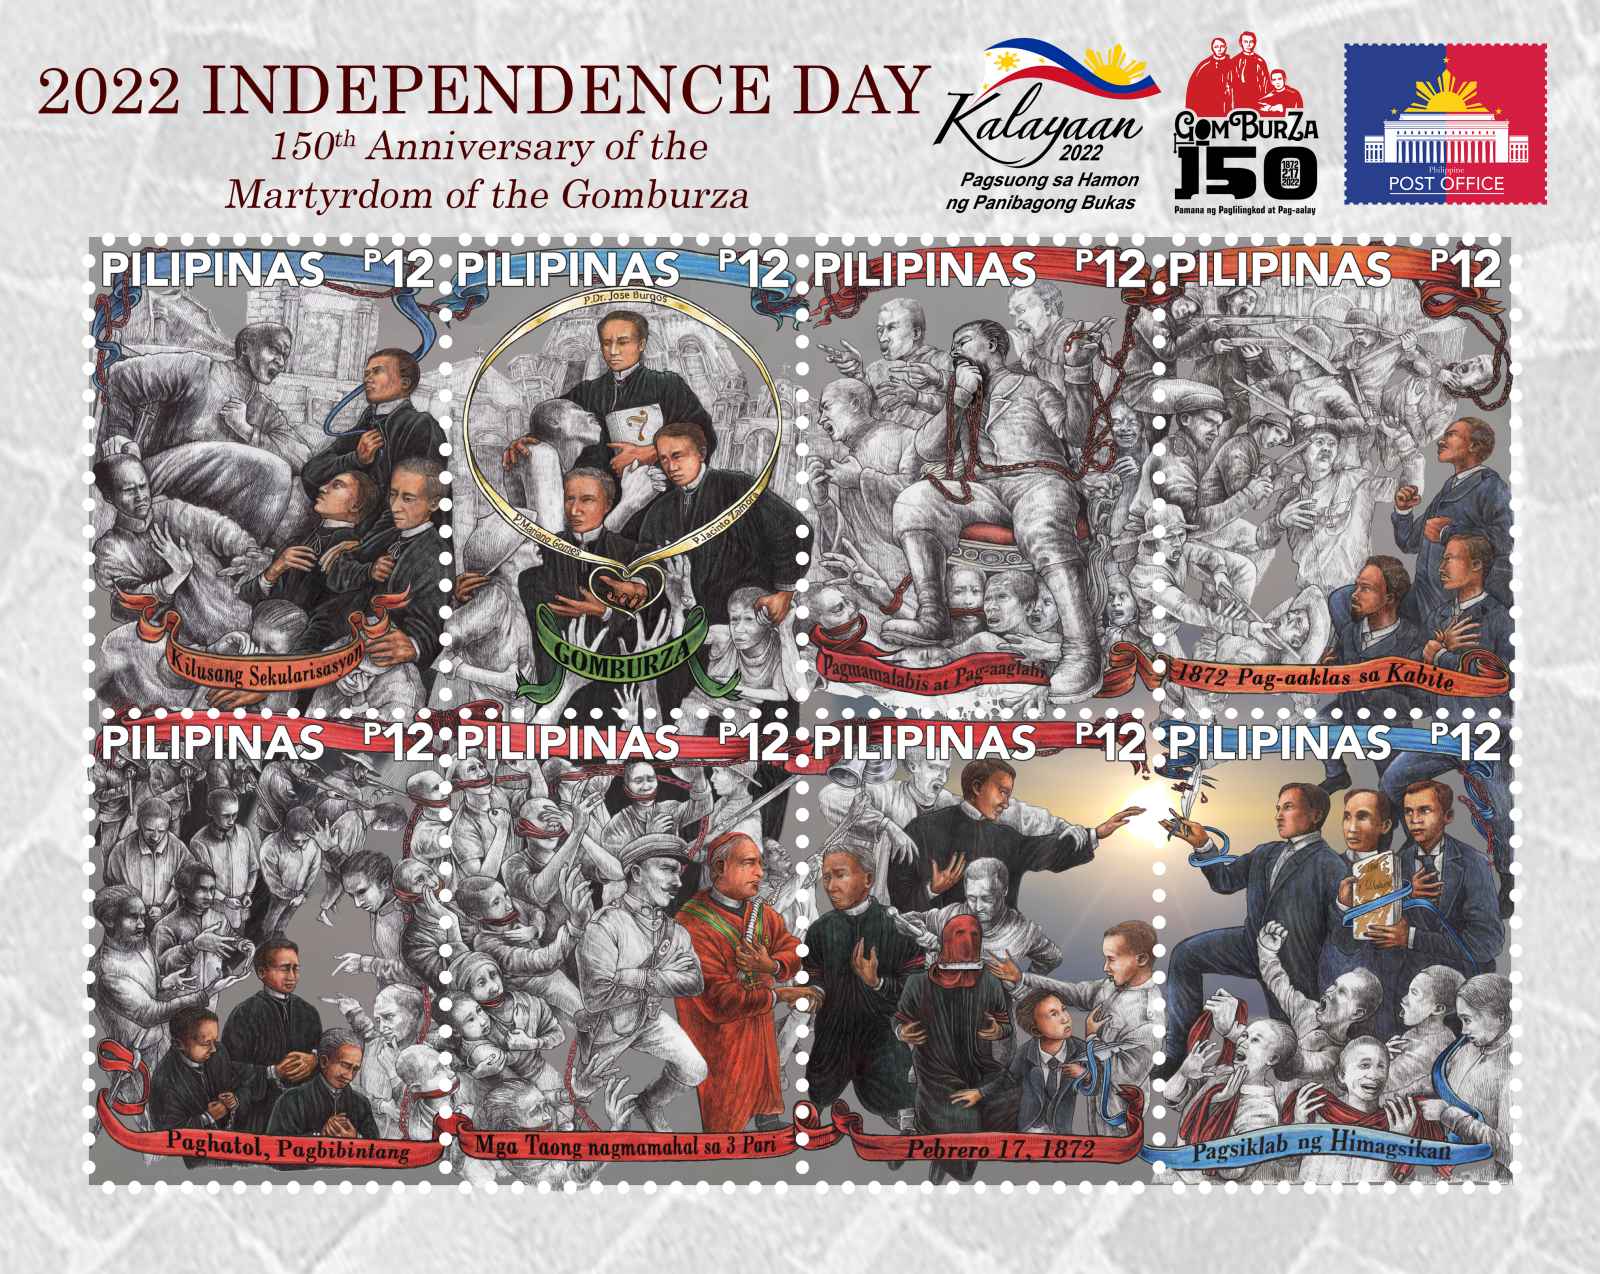 Post Office releases GOMBURZA stamps to mark Philippine Independence Day